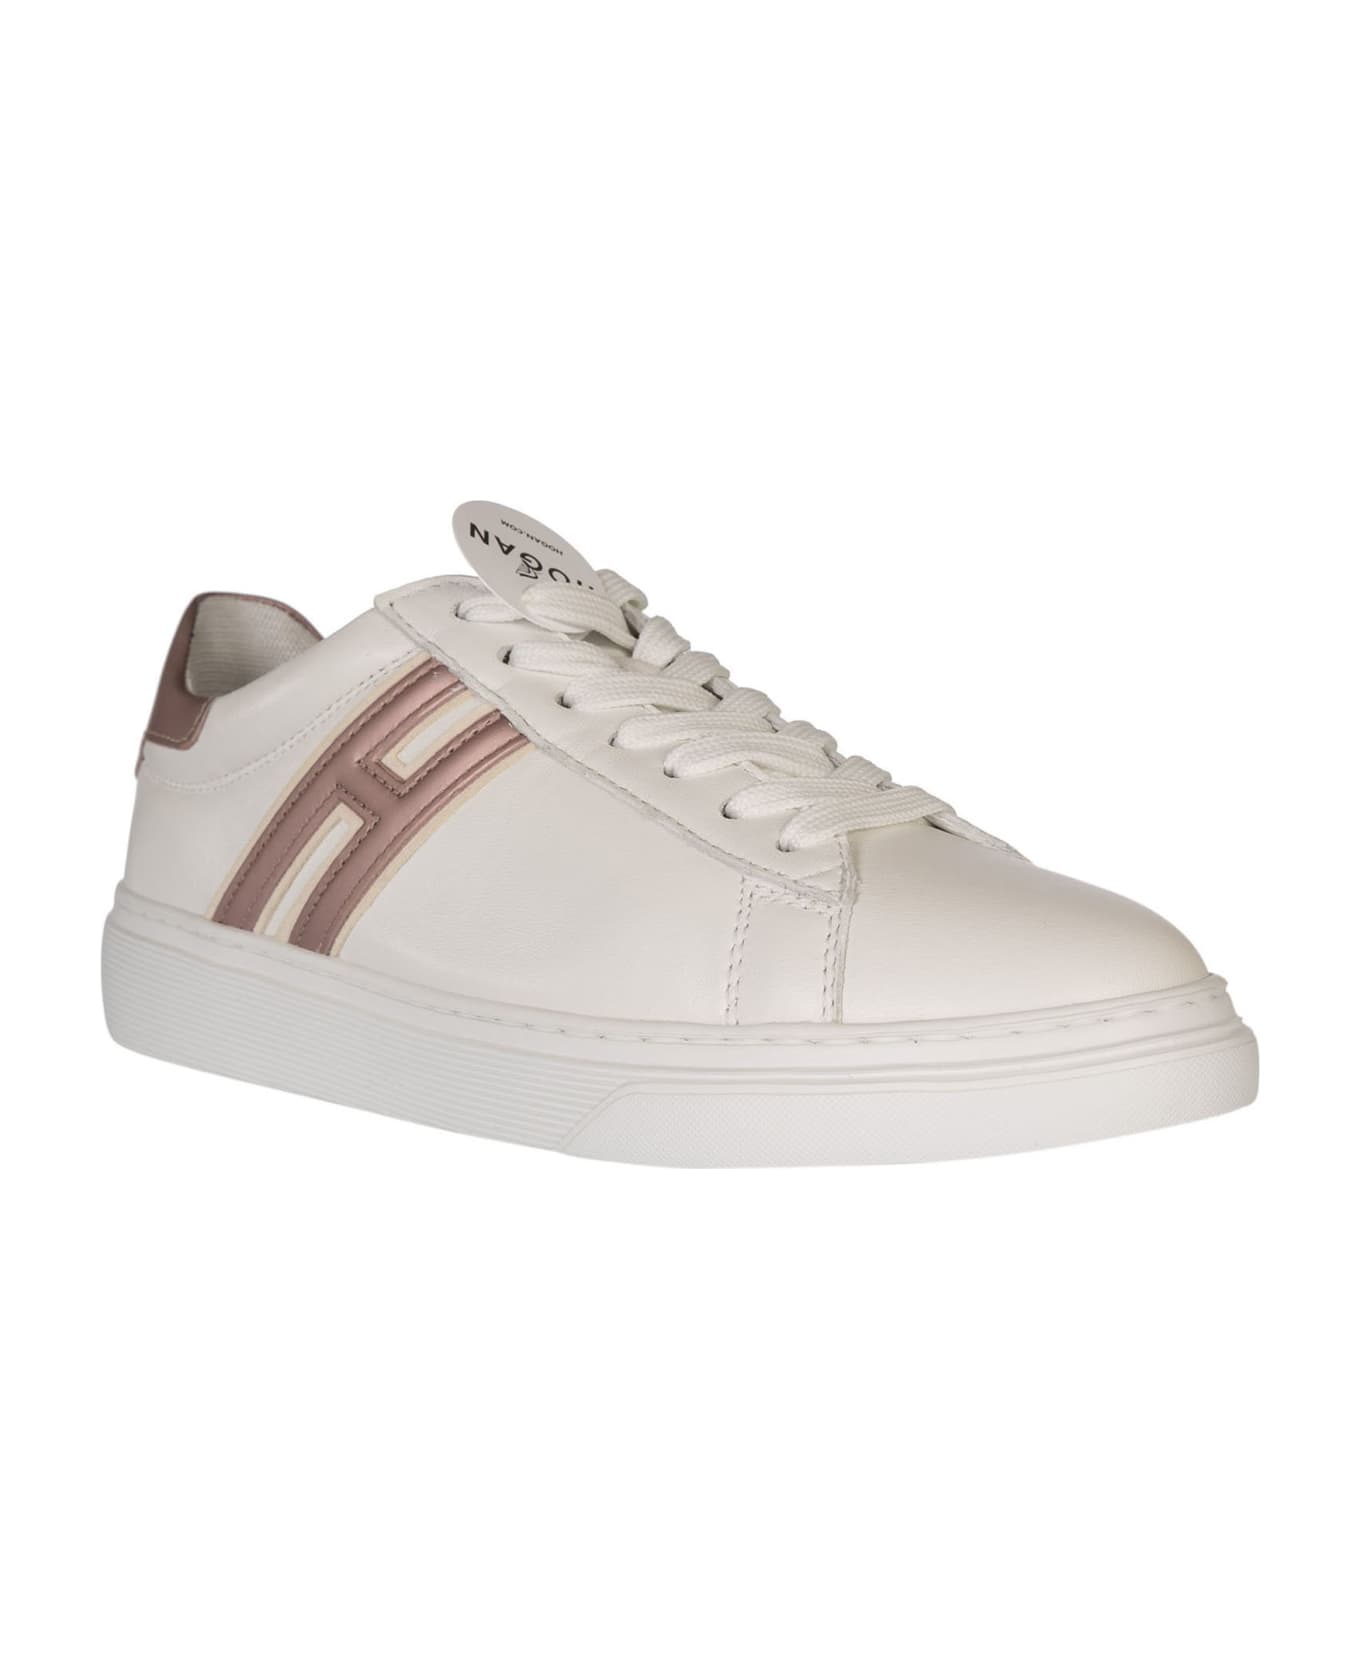 Hogan H365 Canaletto Sneakers - White